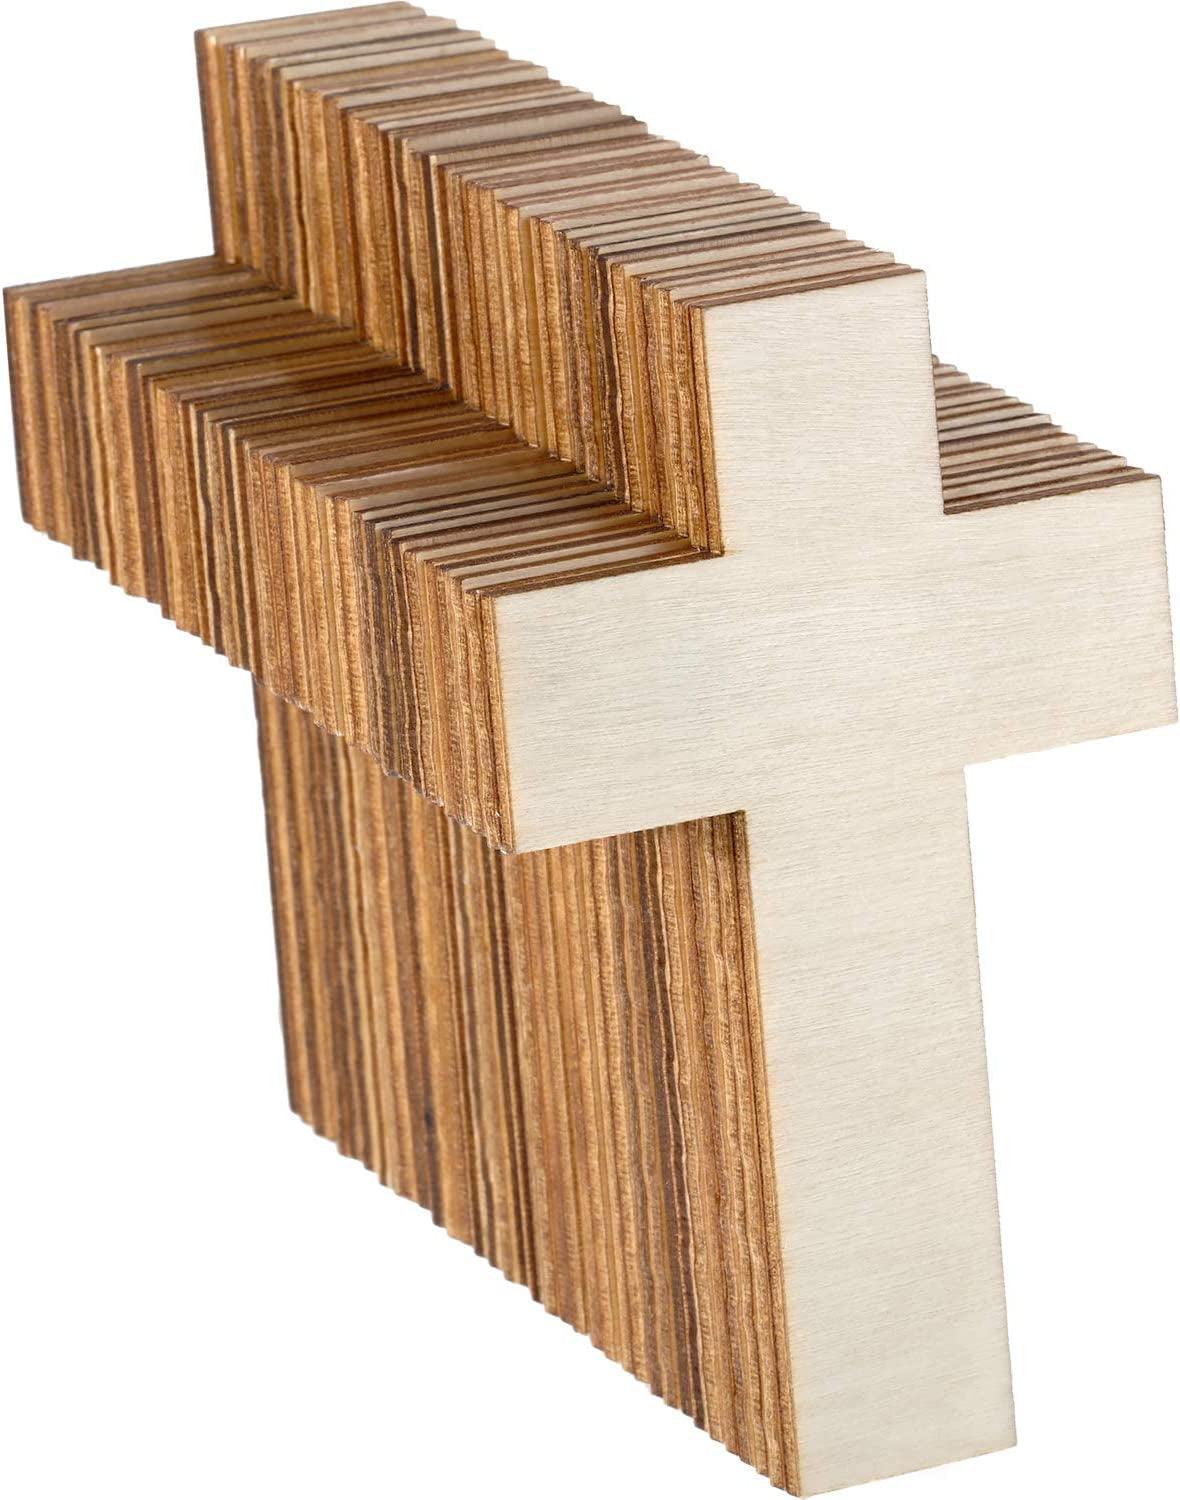 36 Pieces Blank Wood Cutouts Unfinished Cross Shaped Wooden Pieces for DIY Arts Craft Project, Decor - WoodArtSupply